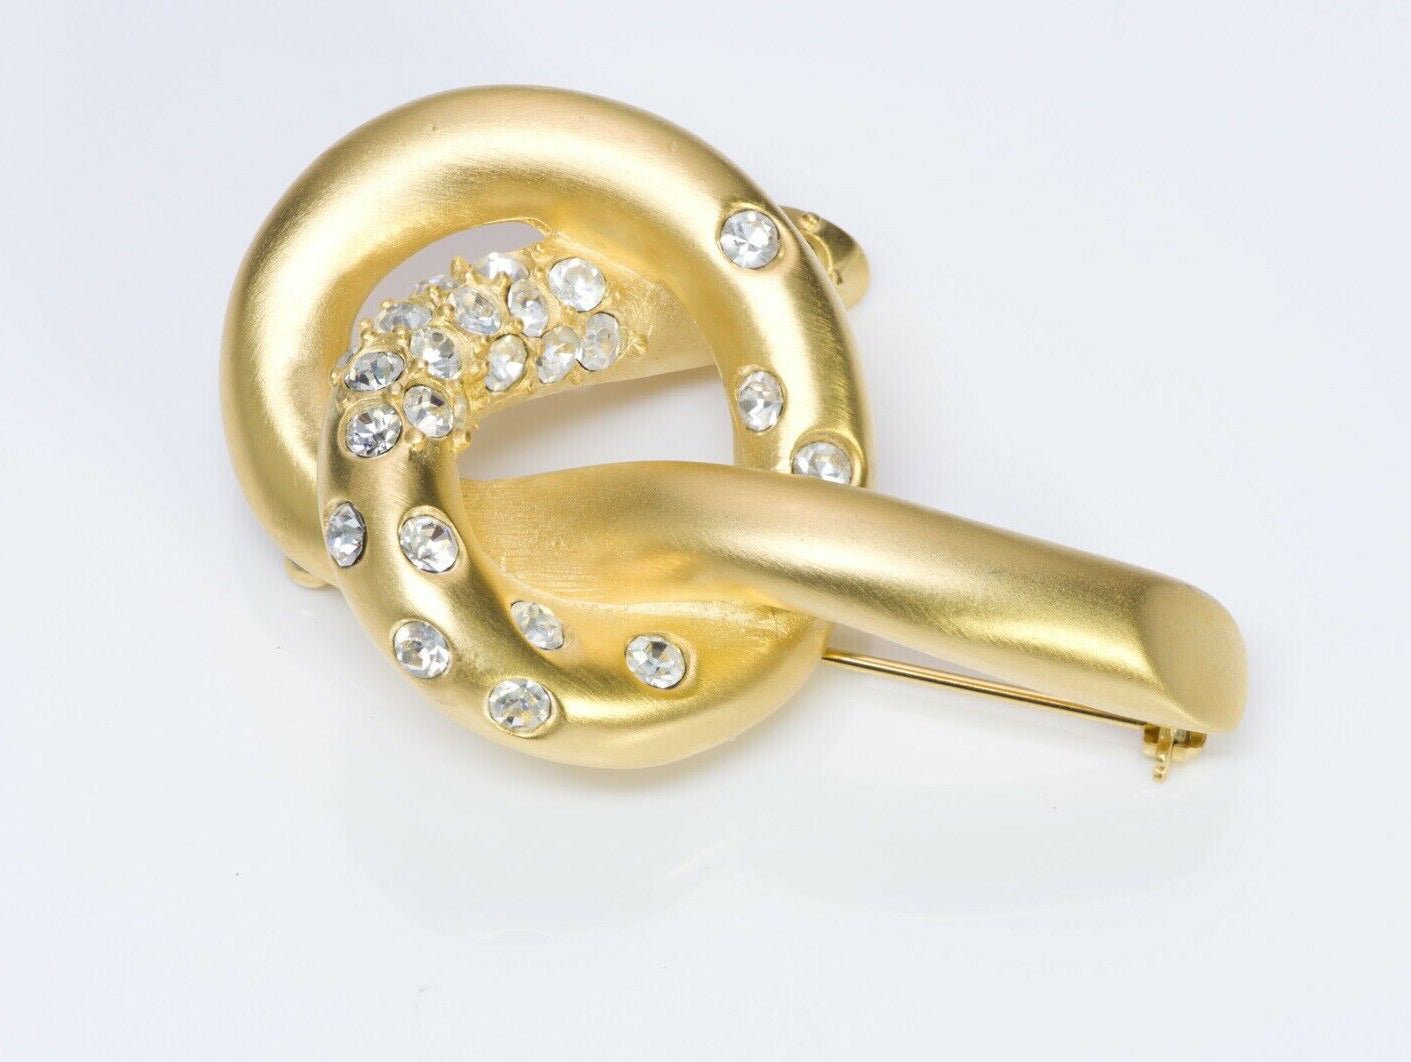 Vintage GIVENCHY Gold Tone Crystal Knot Brooch